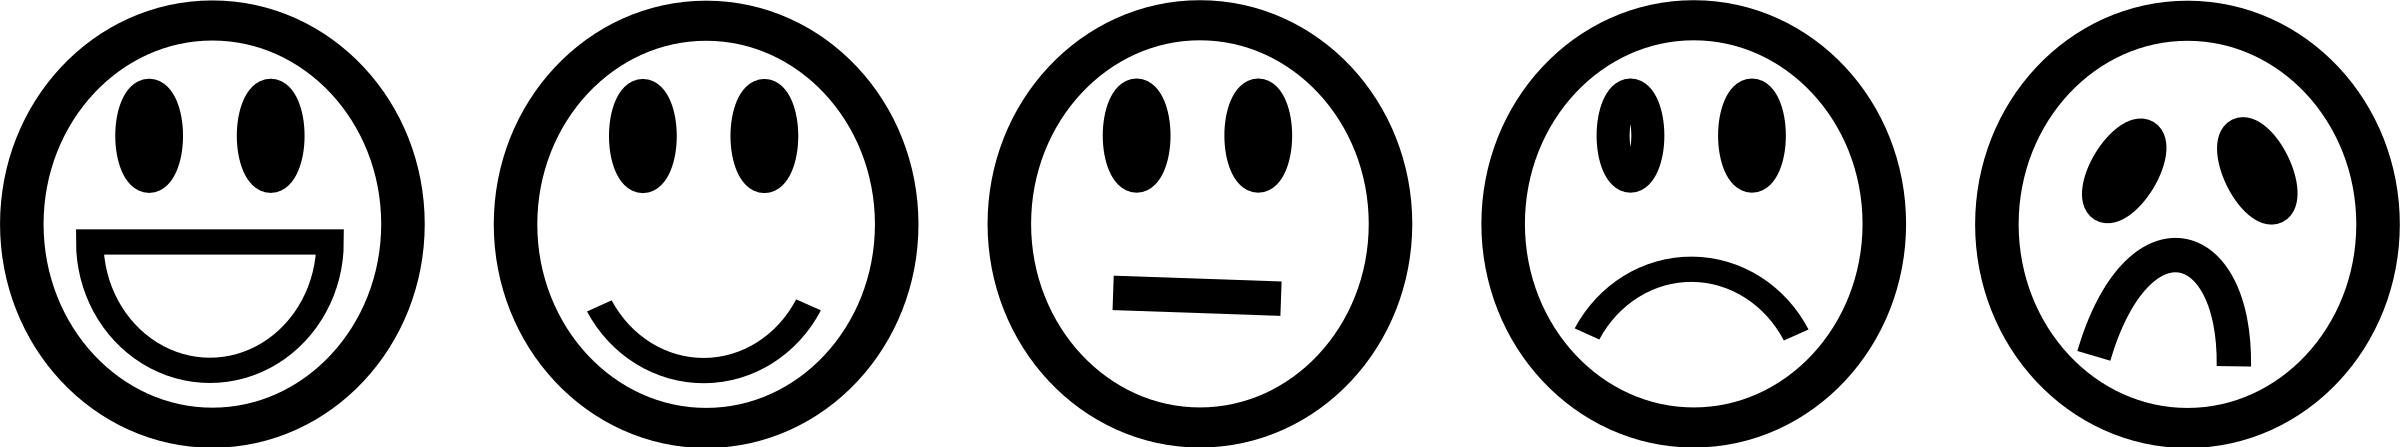 Smileys Black and White png